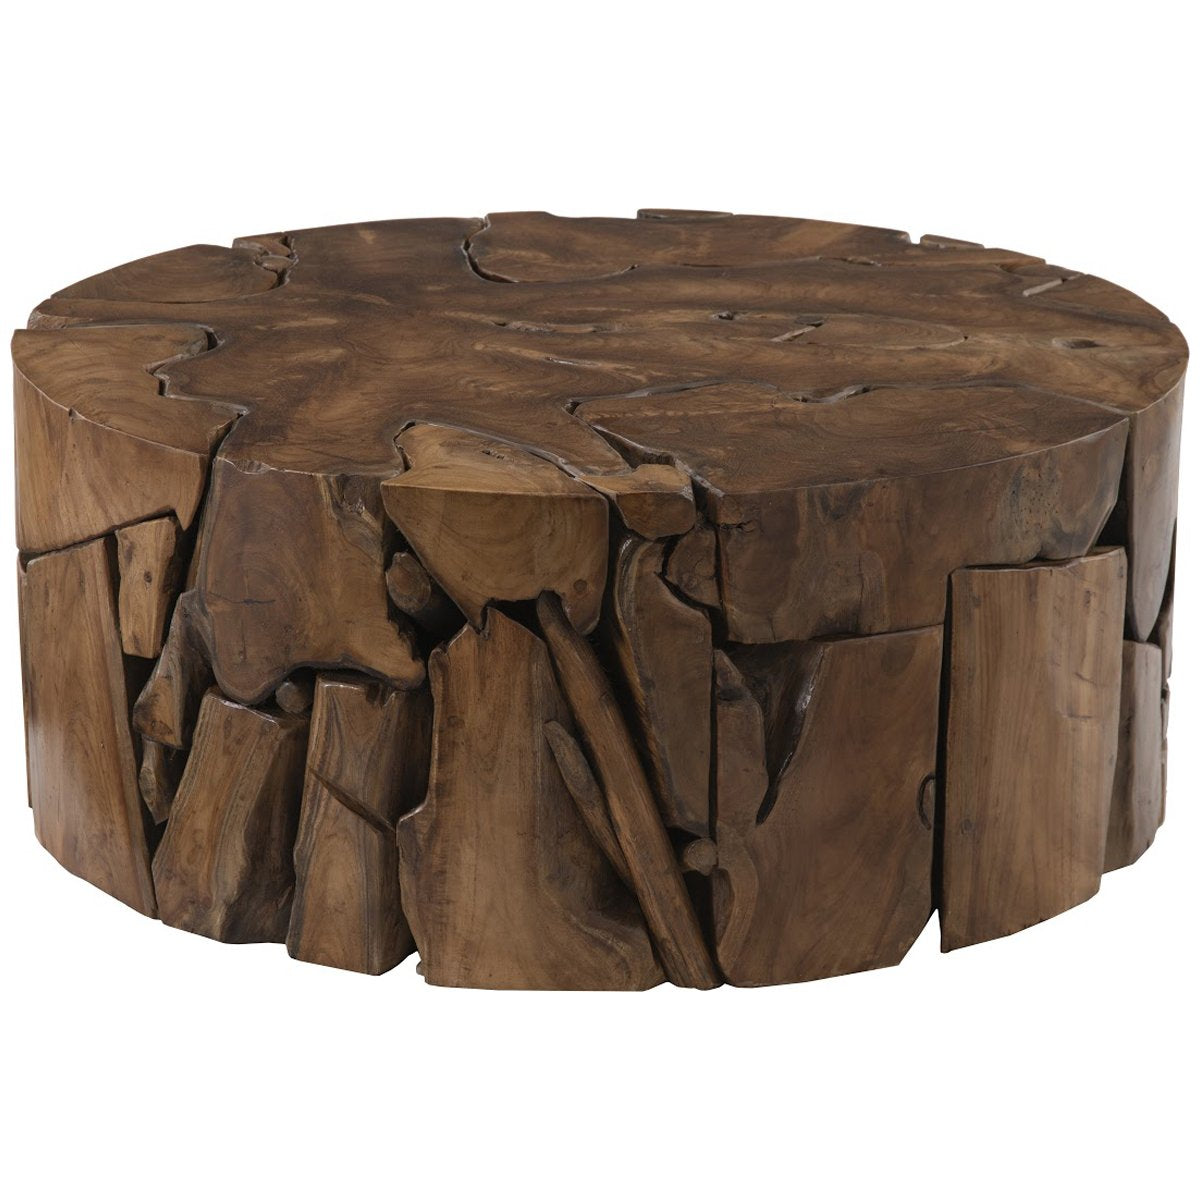 Phillips Collection Teak Chunk Coffee Table, Round